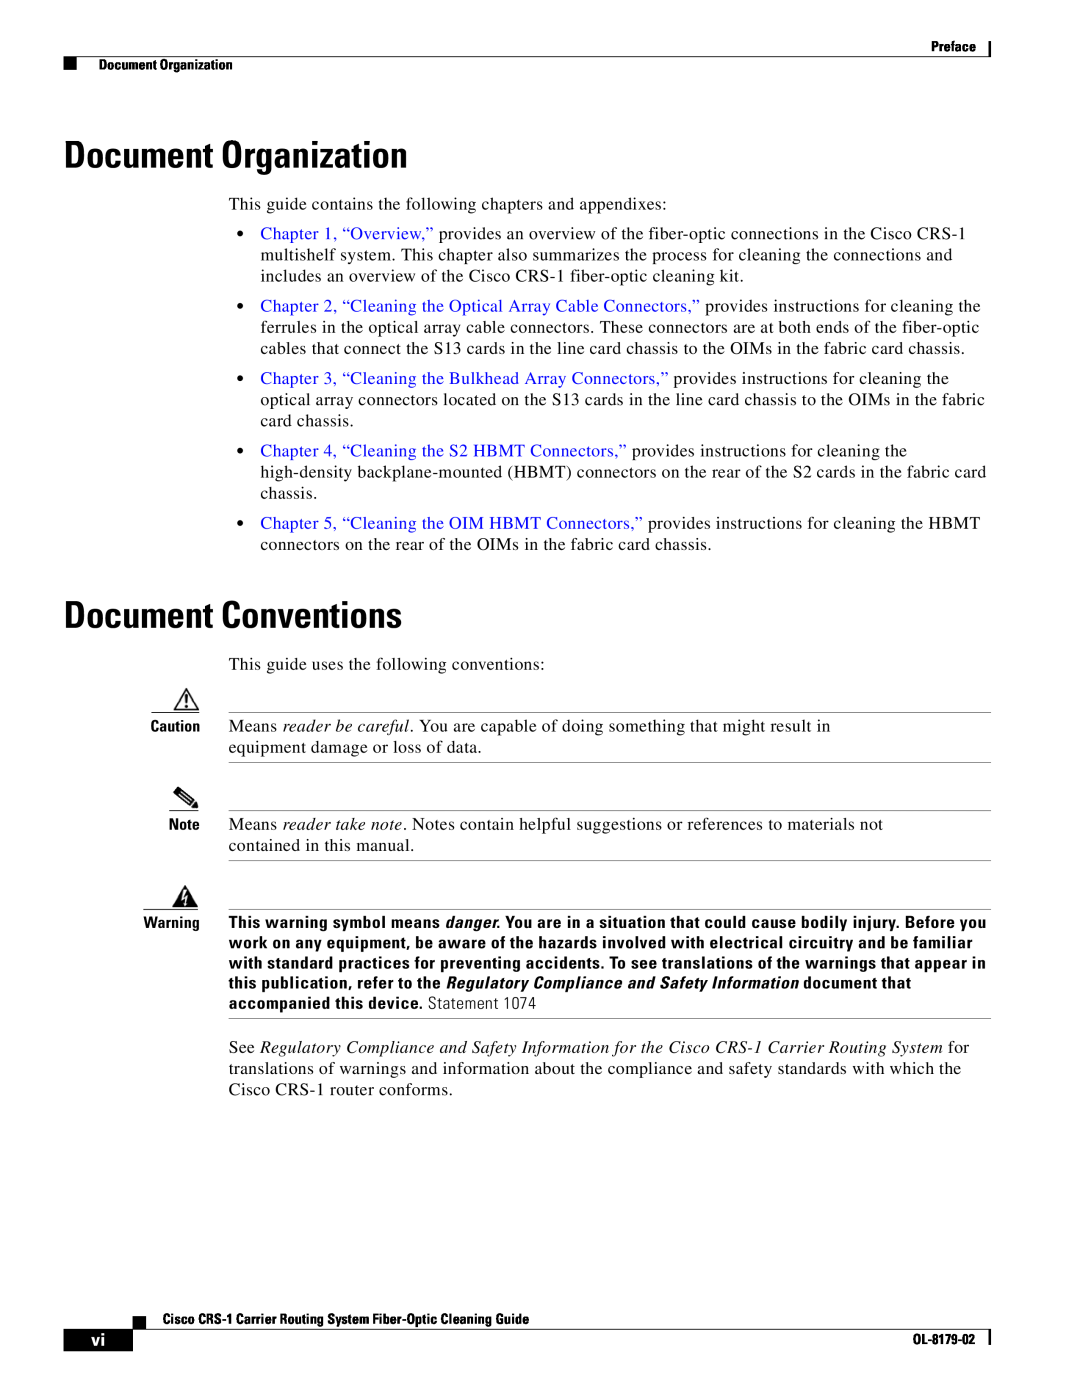 Cisco Systems CRS-1 manual Document Organization, Document Conventions 